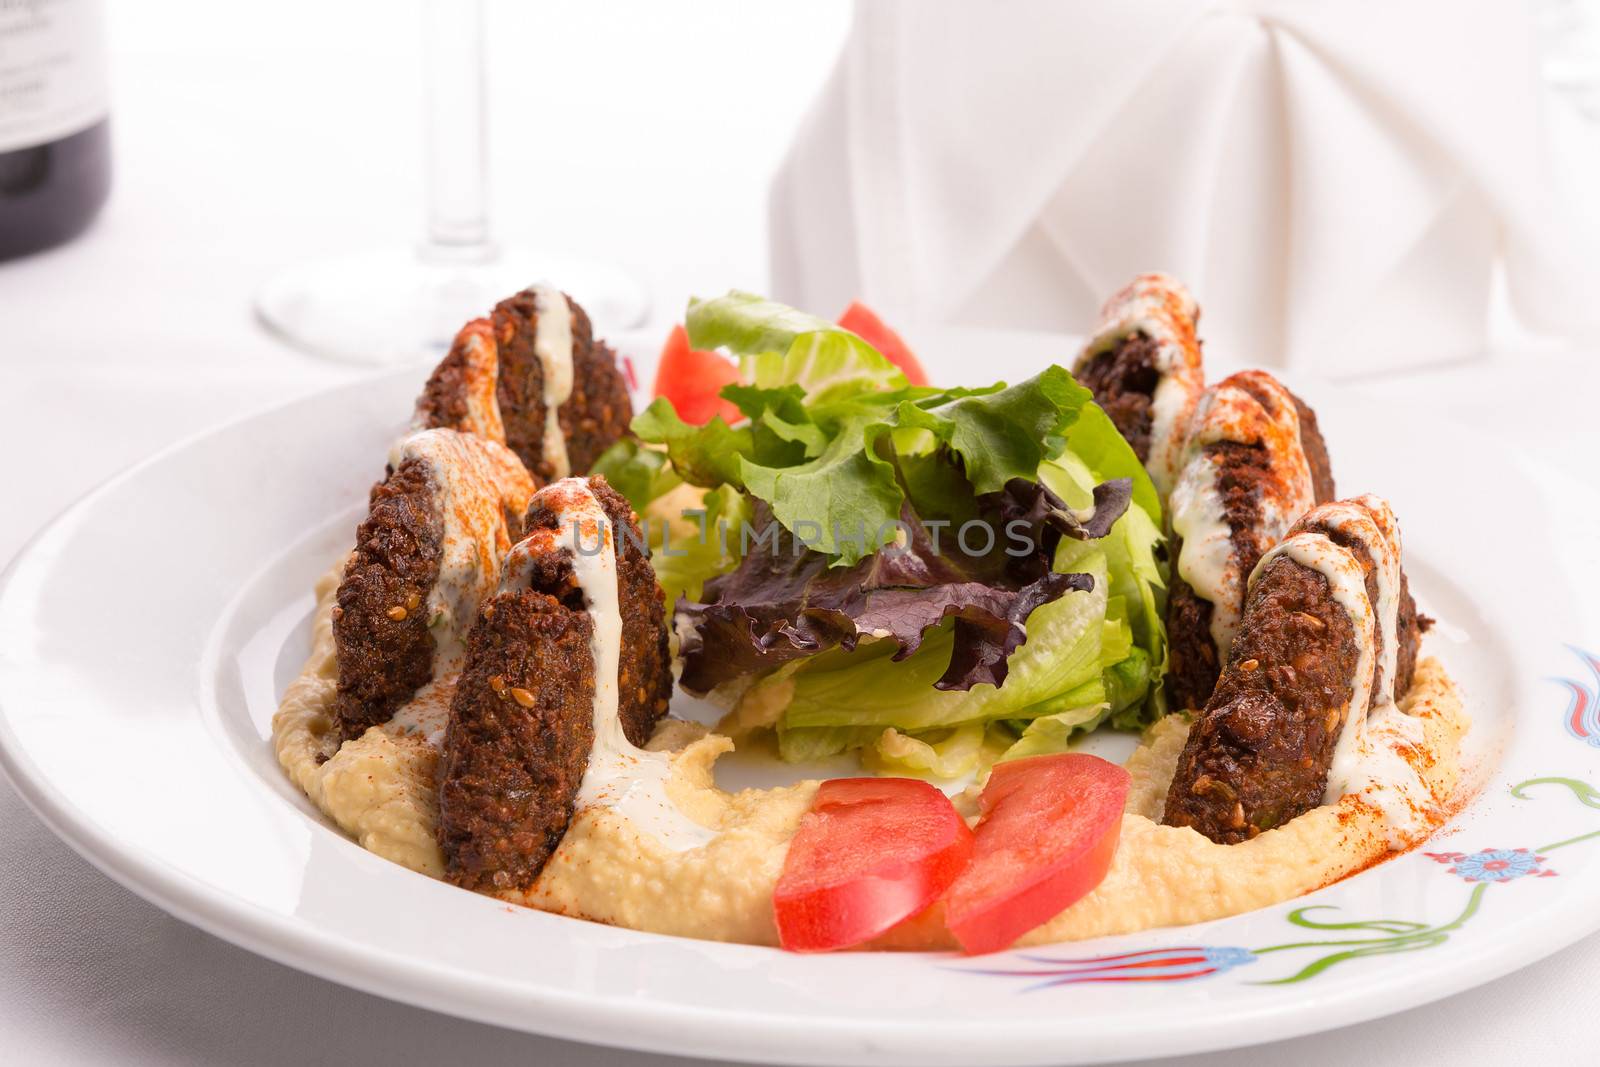 Fried half cut falafel patties of finely ground garbanzo beans spiced with parsley, cilantro and onion, laid on hummus and garnished with tomato slices and lettuce